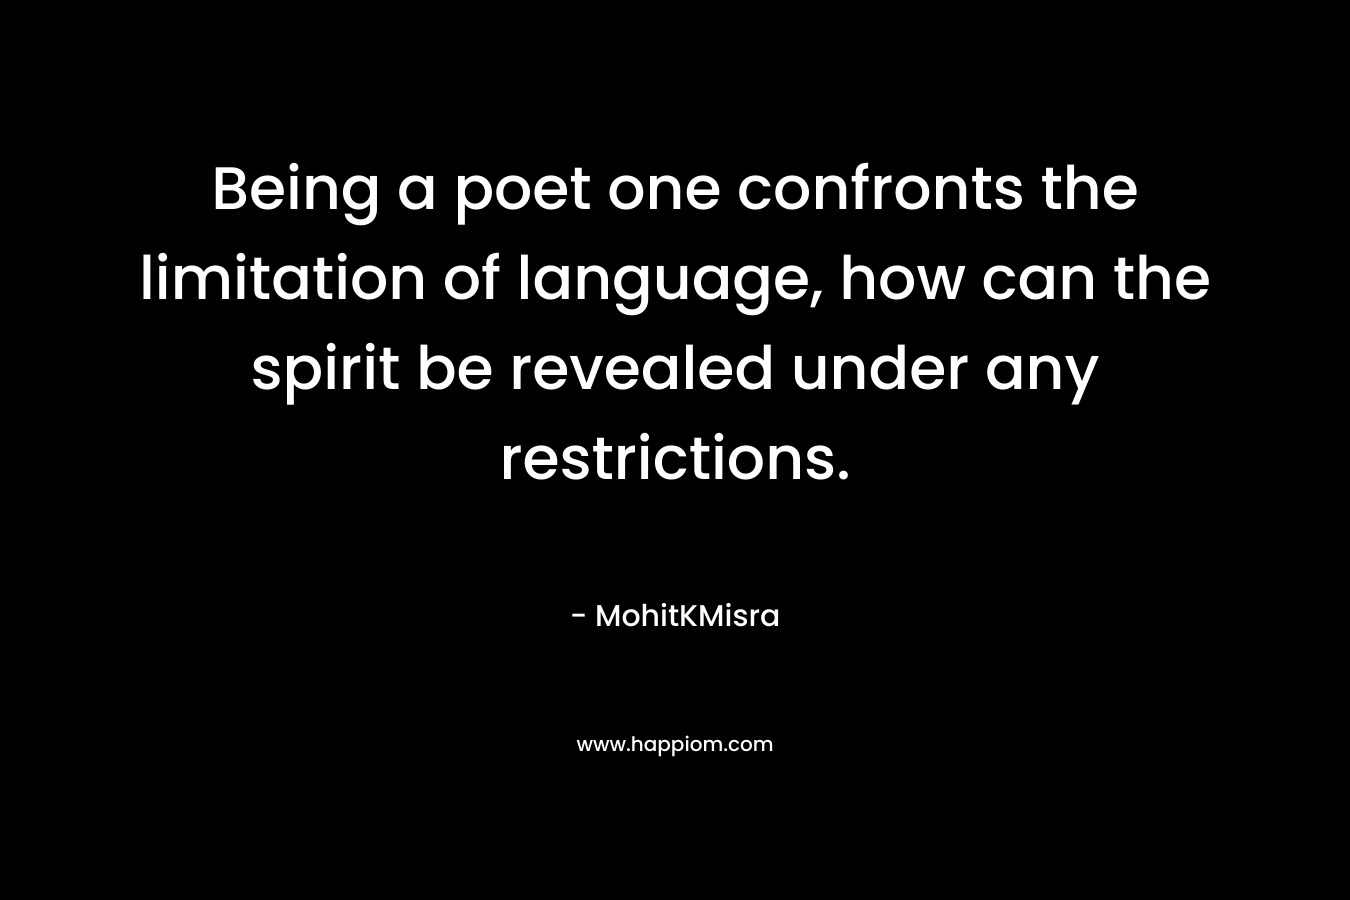 Being a poet one confronts the limitation of language, how can the spirit be revealed under any restrictions.